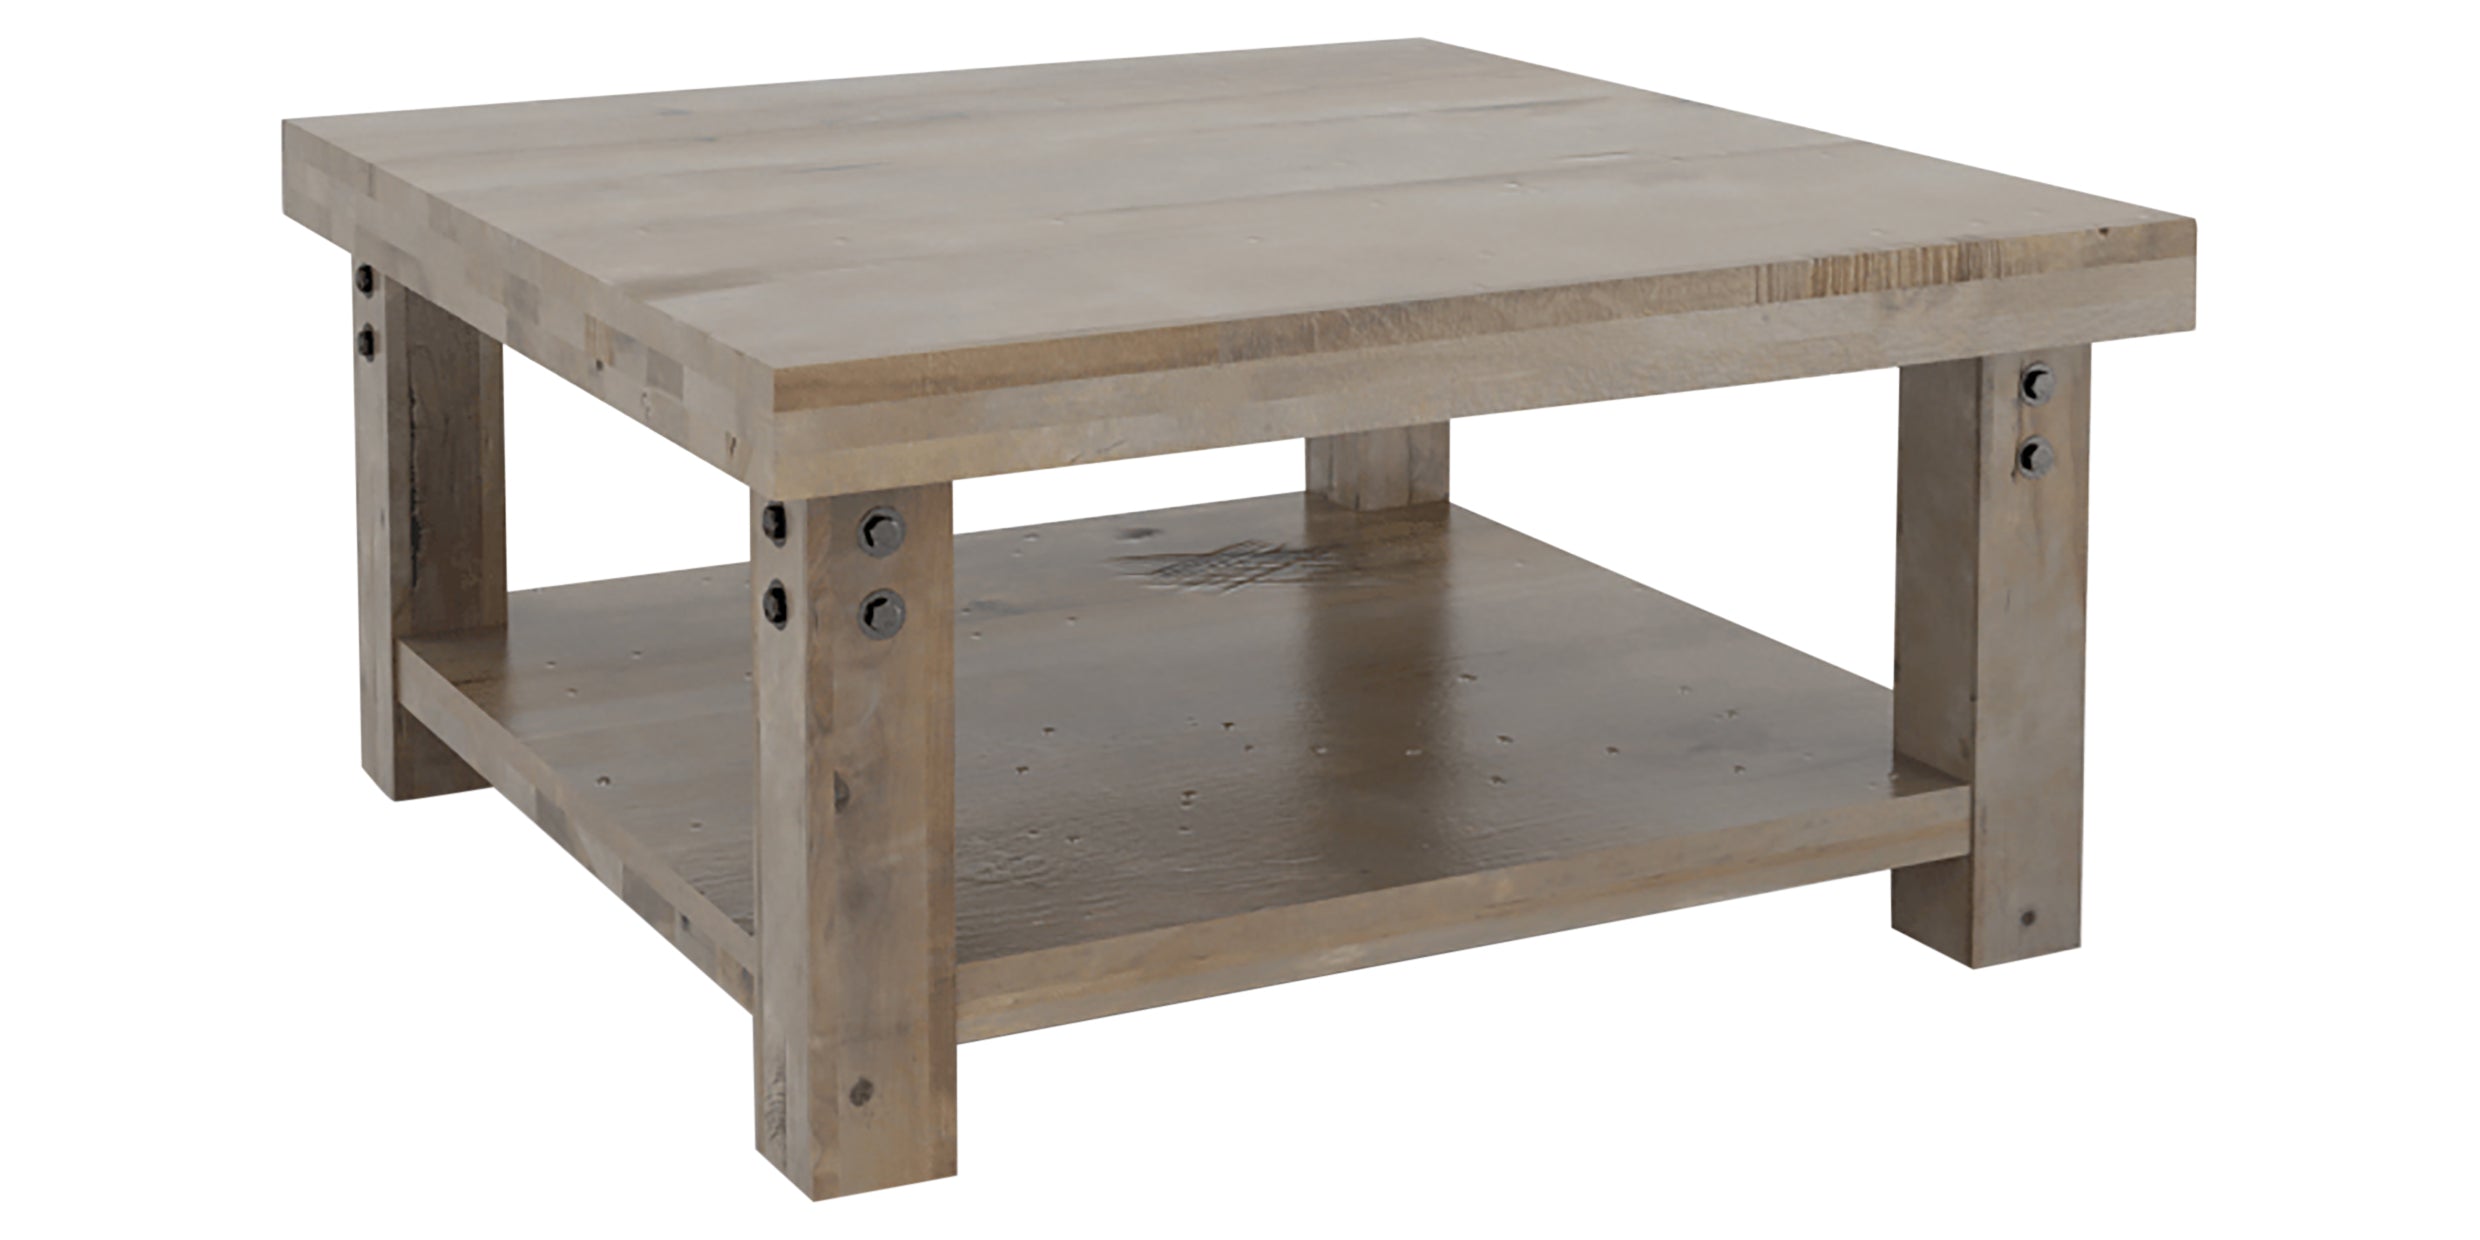 Shadow with HJ Legs | Canadel Loft Coffee Table 3636 | Valley Ridge Furniture